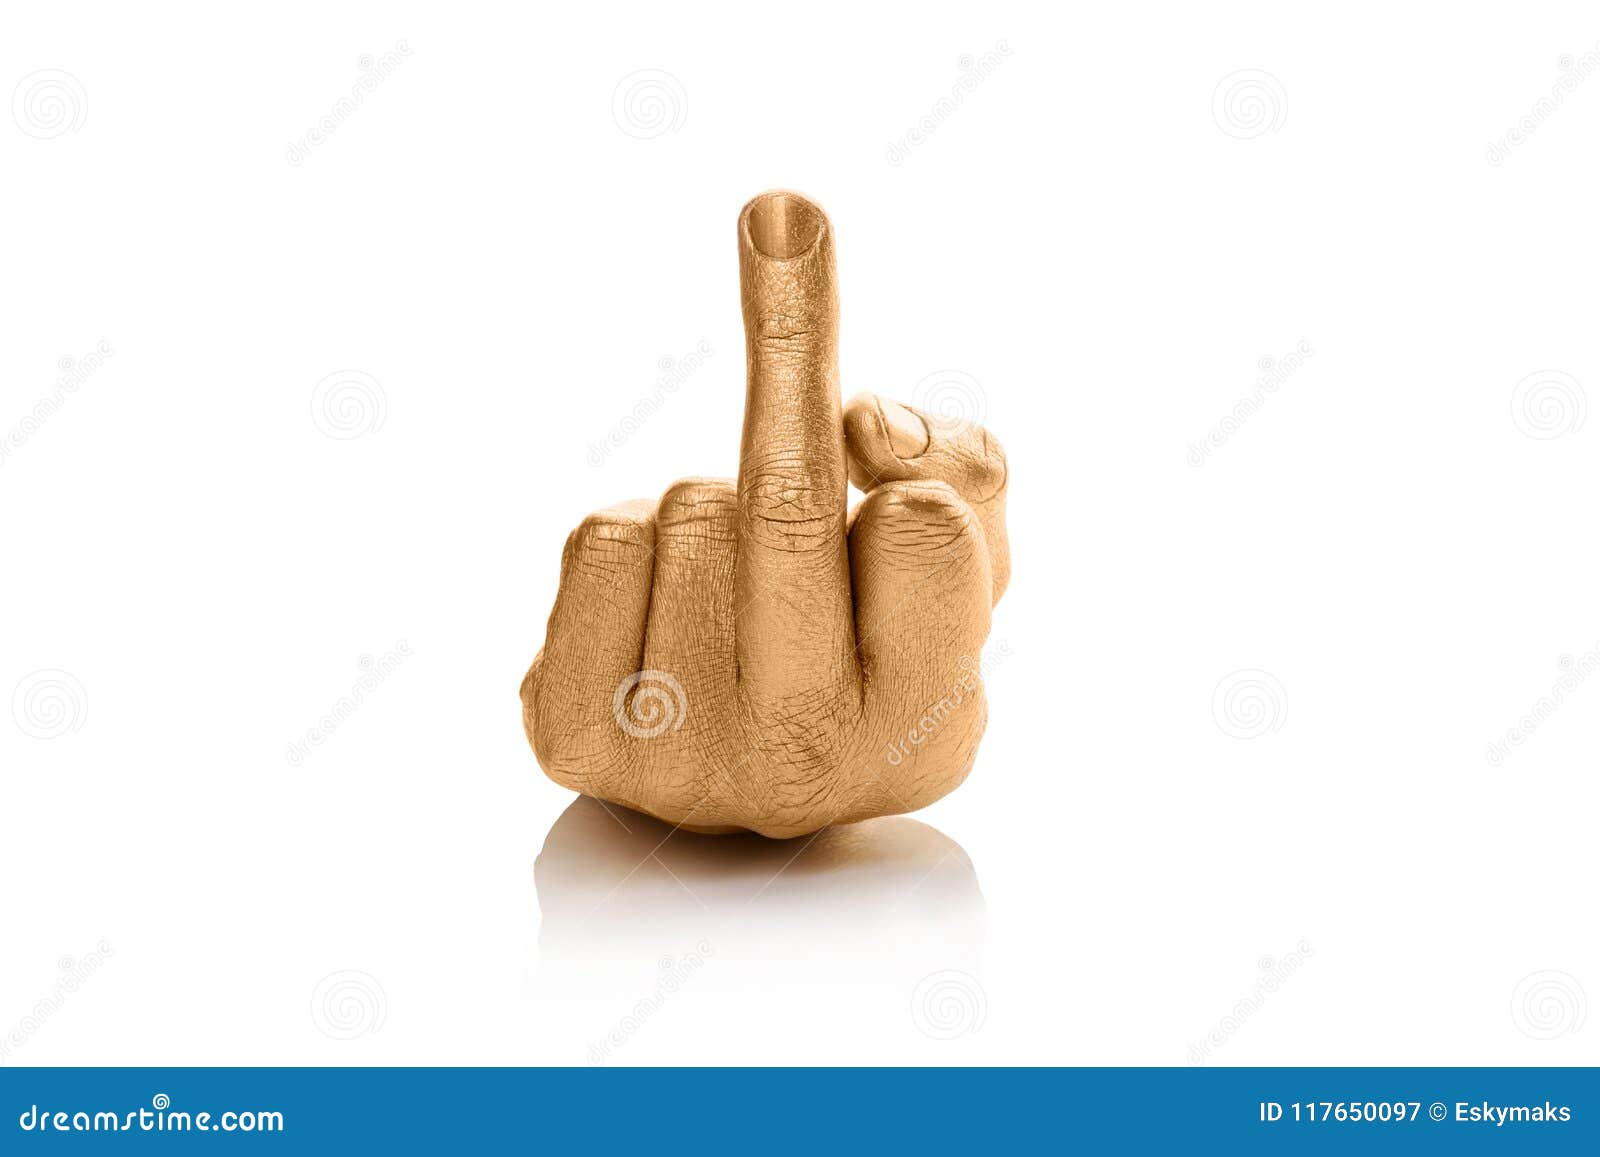 Middle Finger Gesture On A Blue Background Royalty-Free Stock